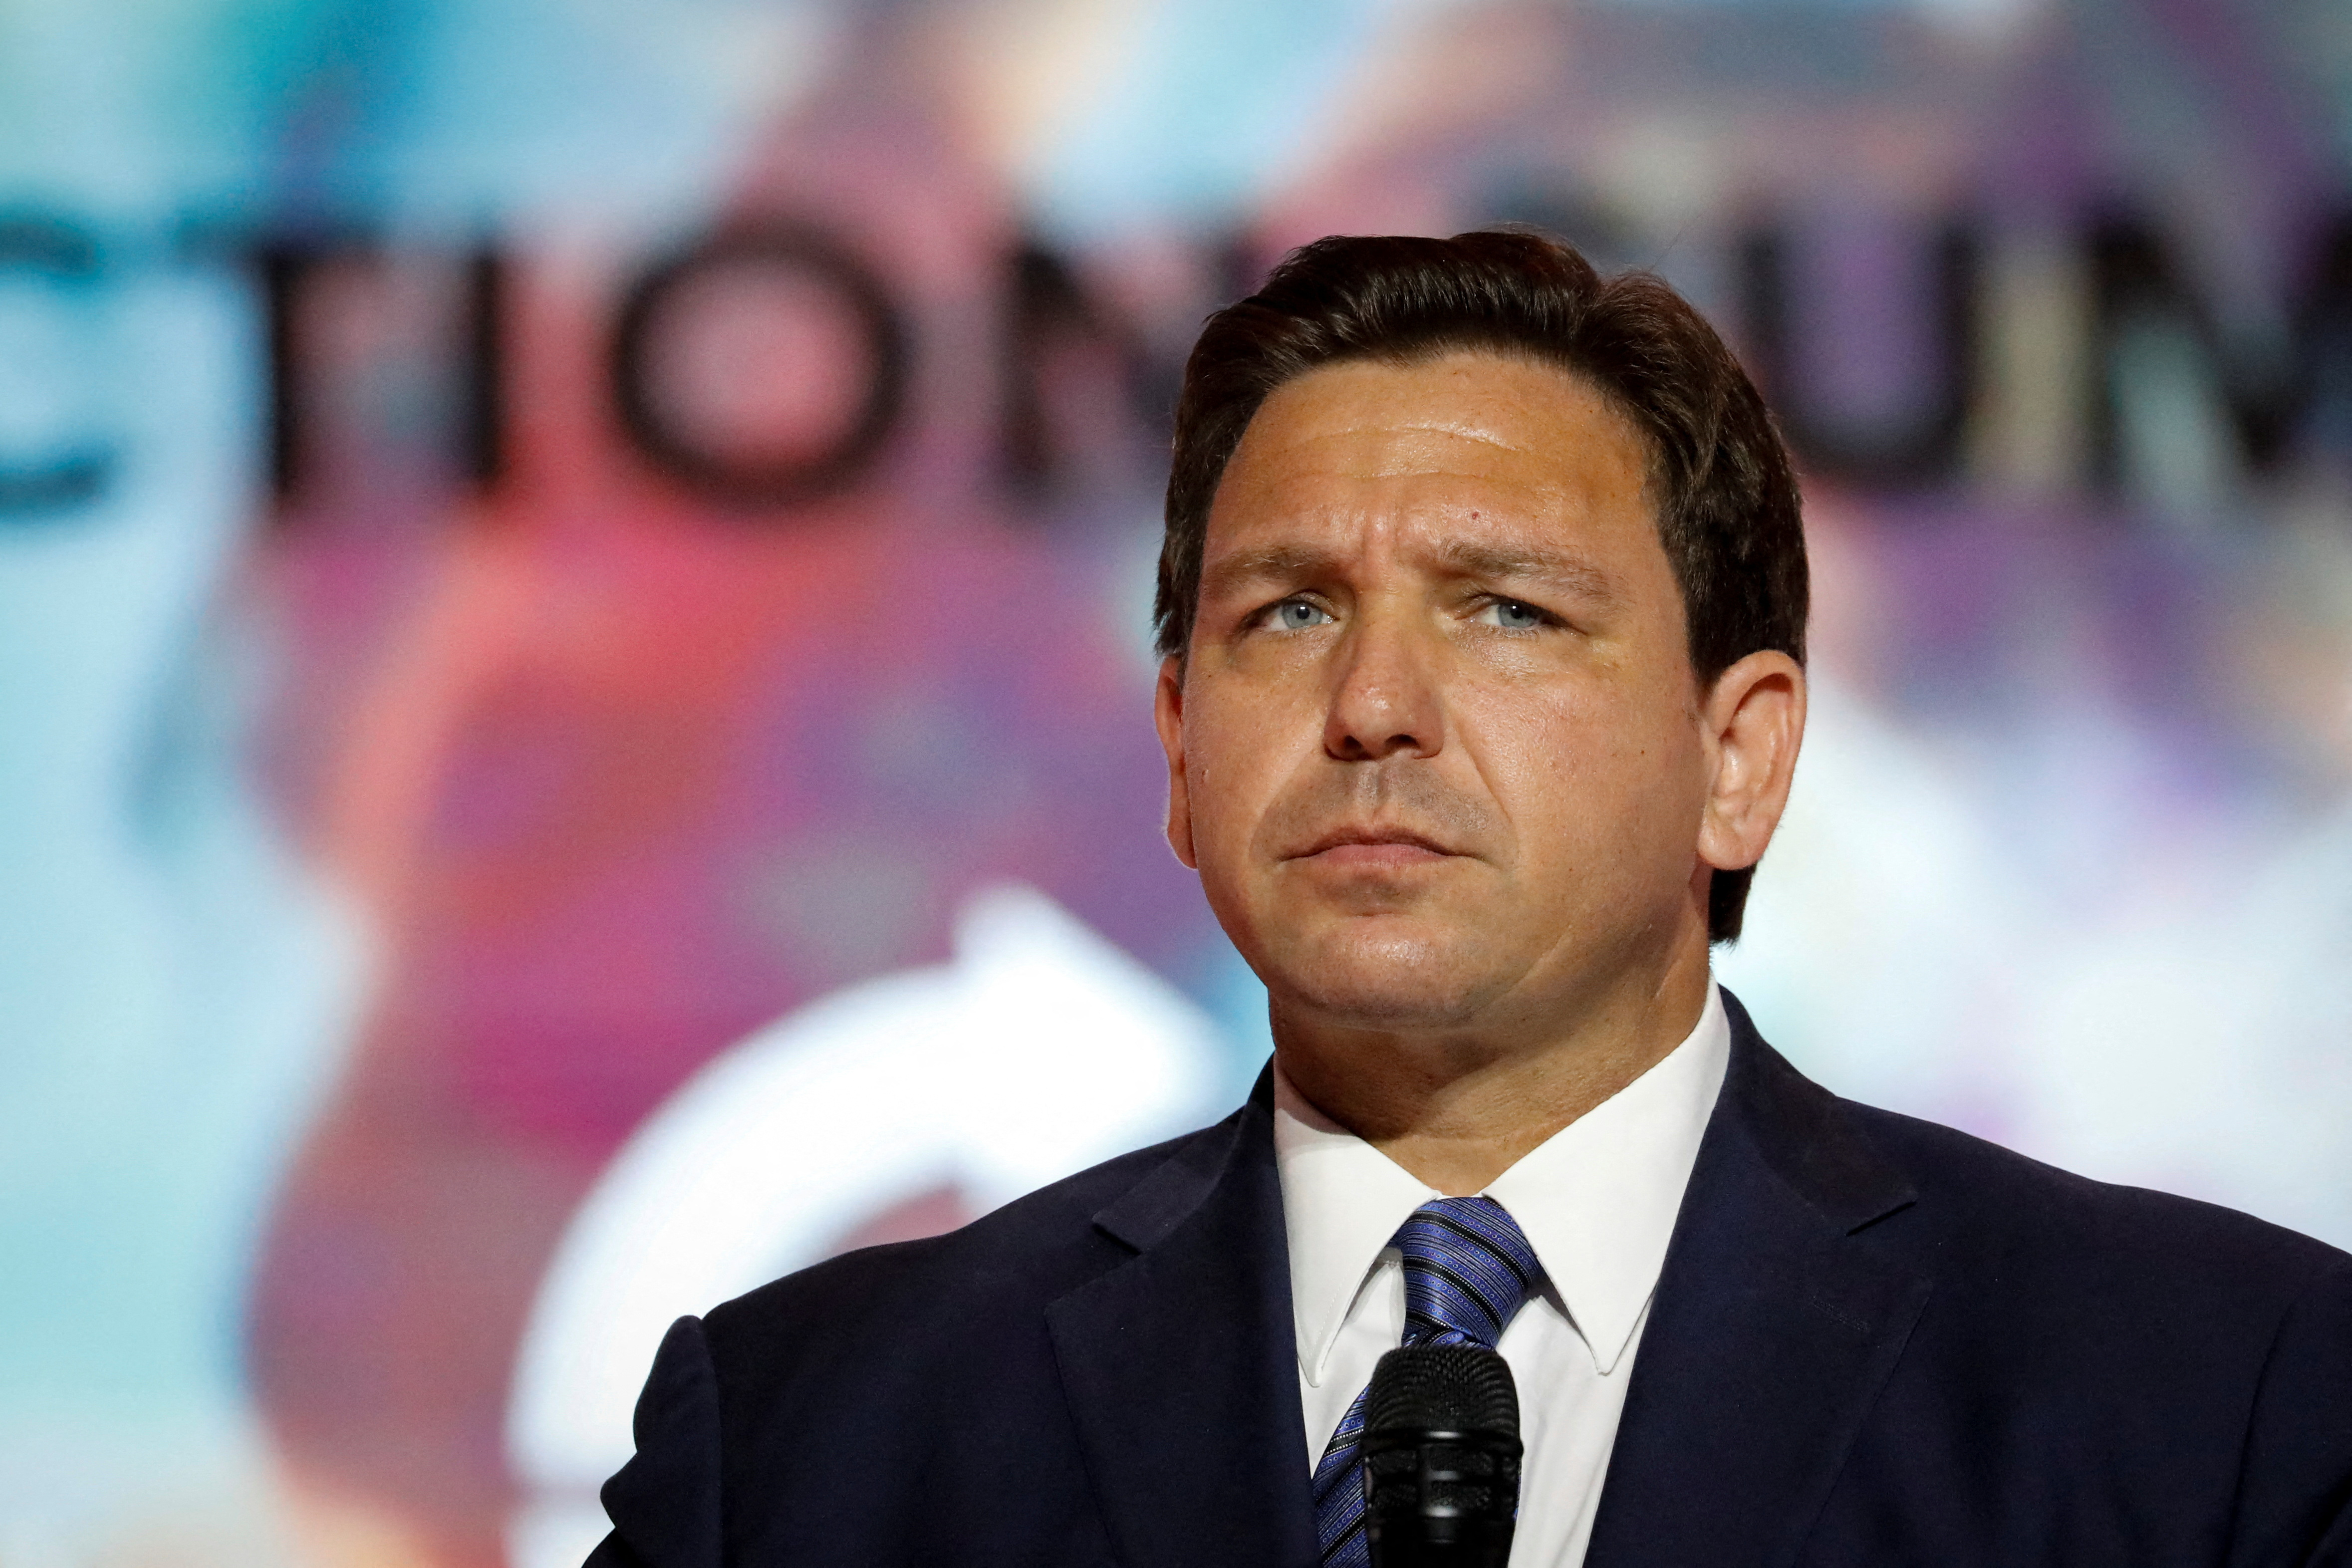 Ron DeSantis Suspends Tampa Prosecutor Who Took Stance Against Criminalizing Abortion Providers – Tampa Bay Now